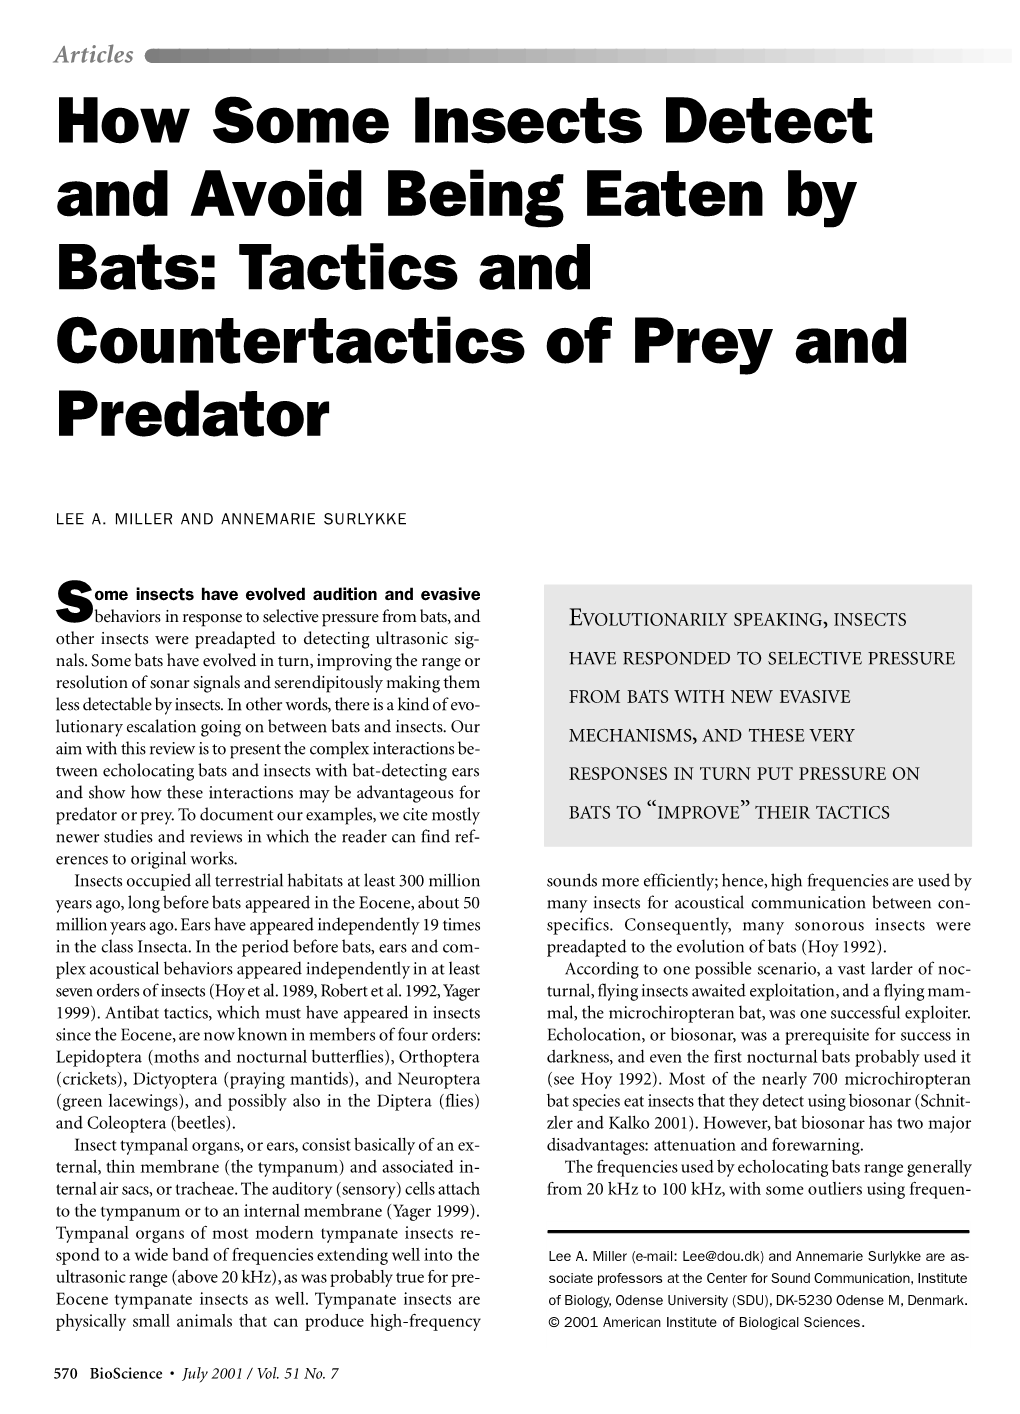 How Some Insects Detect and Avoid Being Eaten by Bats: Tactics and Countertactics of Prey and Predator